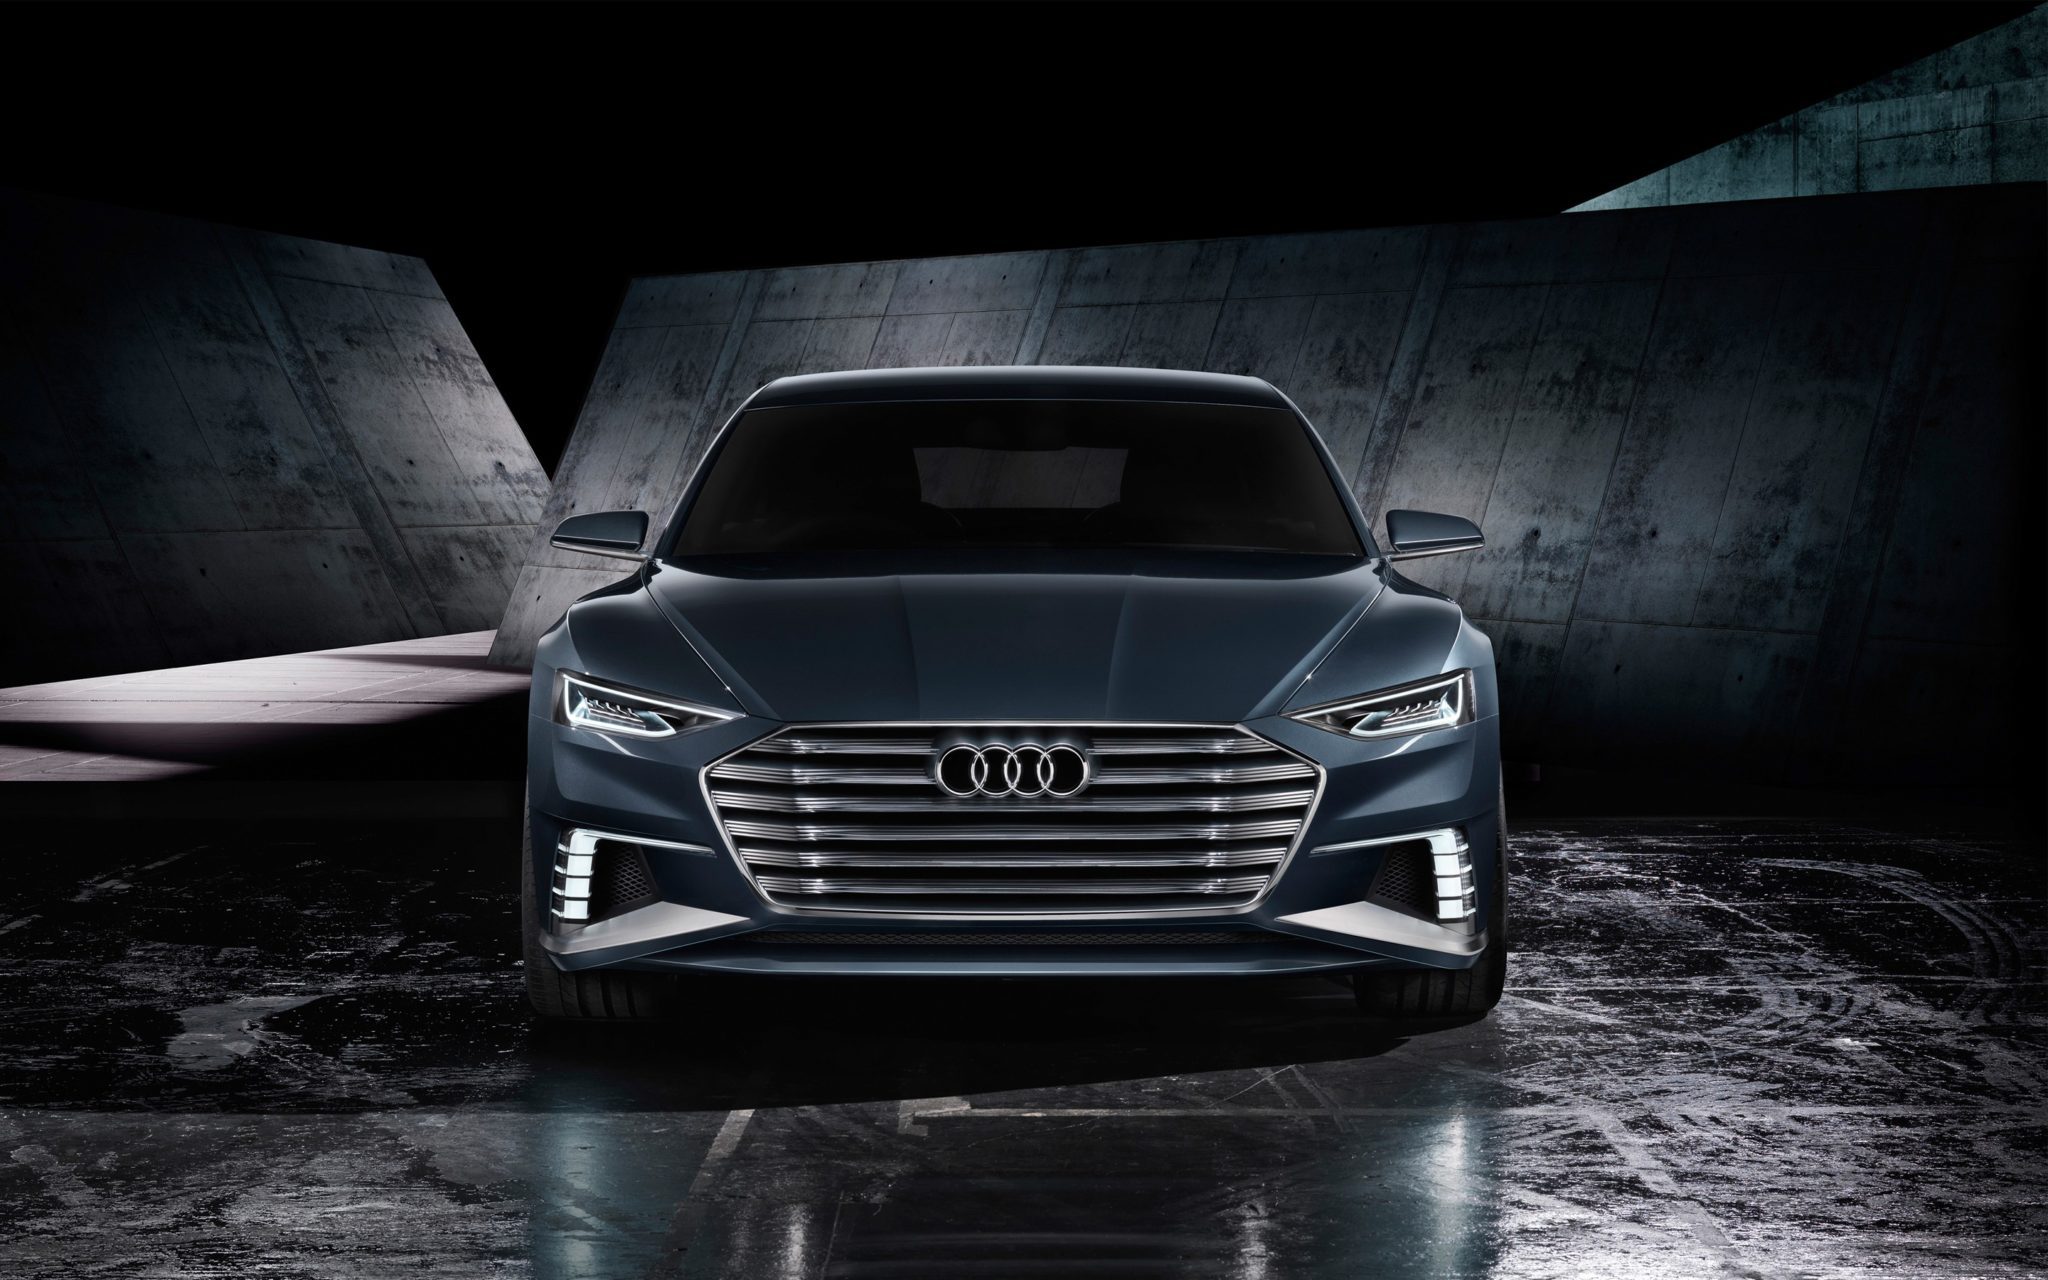 Audi A8 Wide 2018 HD Wallpapers